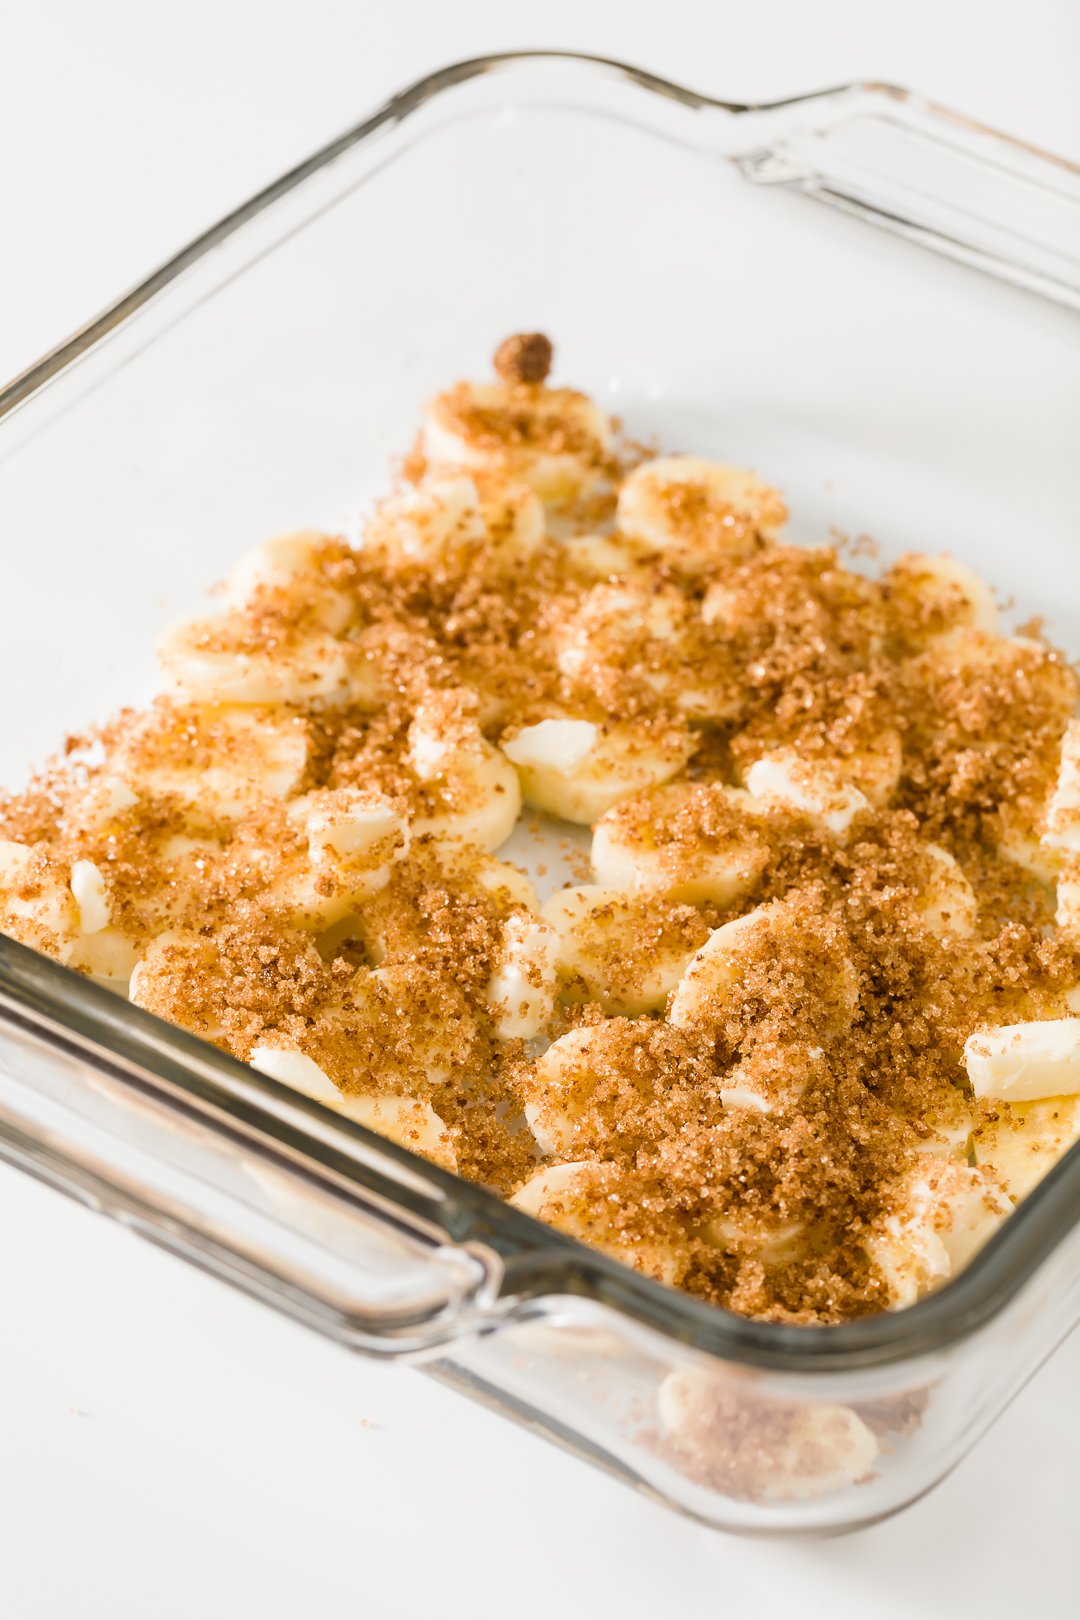 Bananas slices in a glass baking dish topped with butter and brown sugar